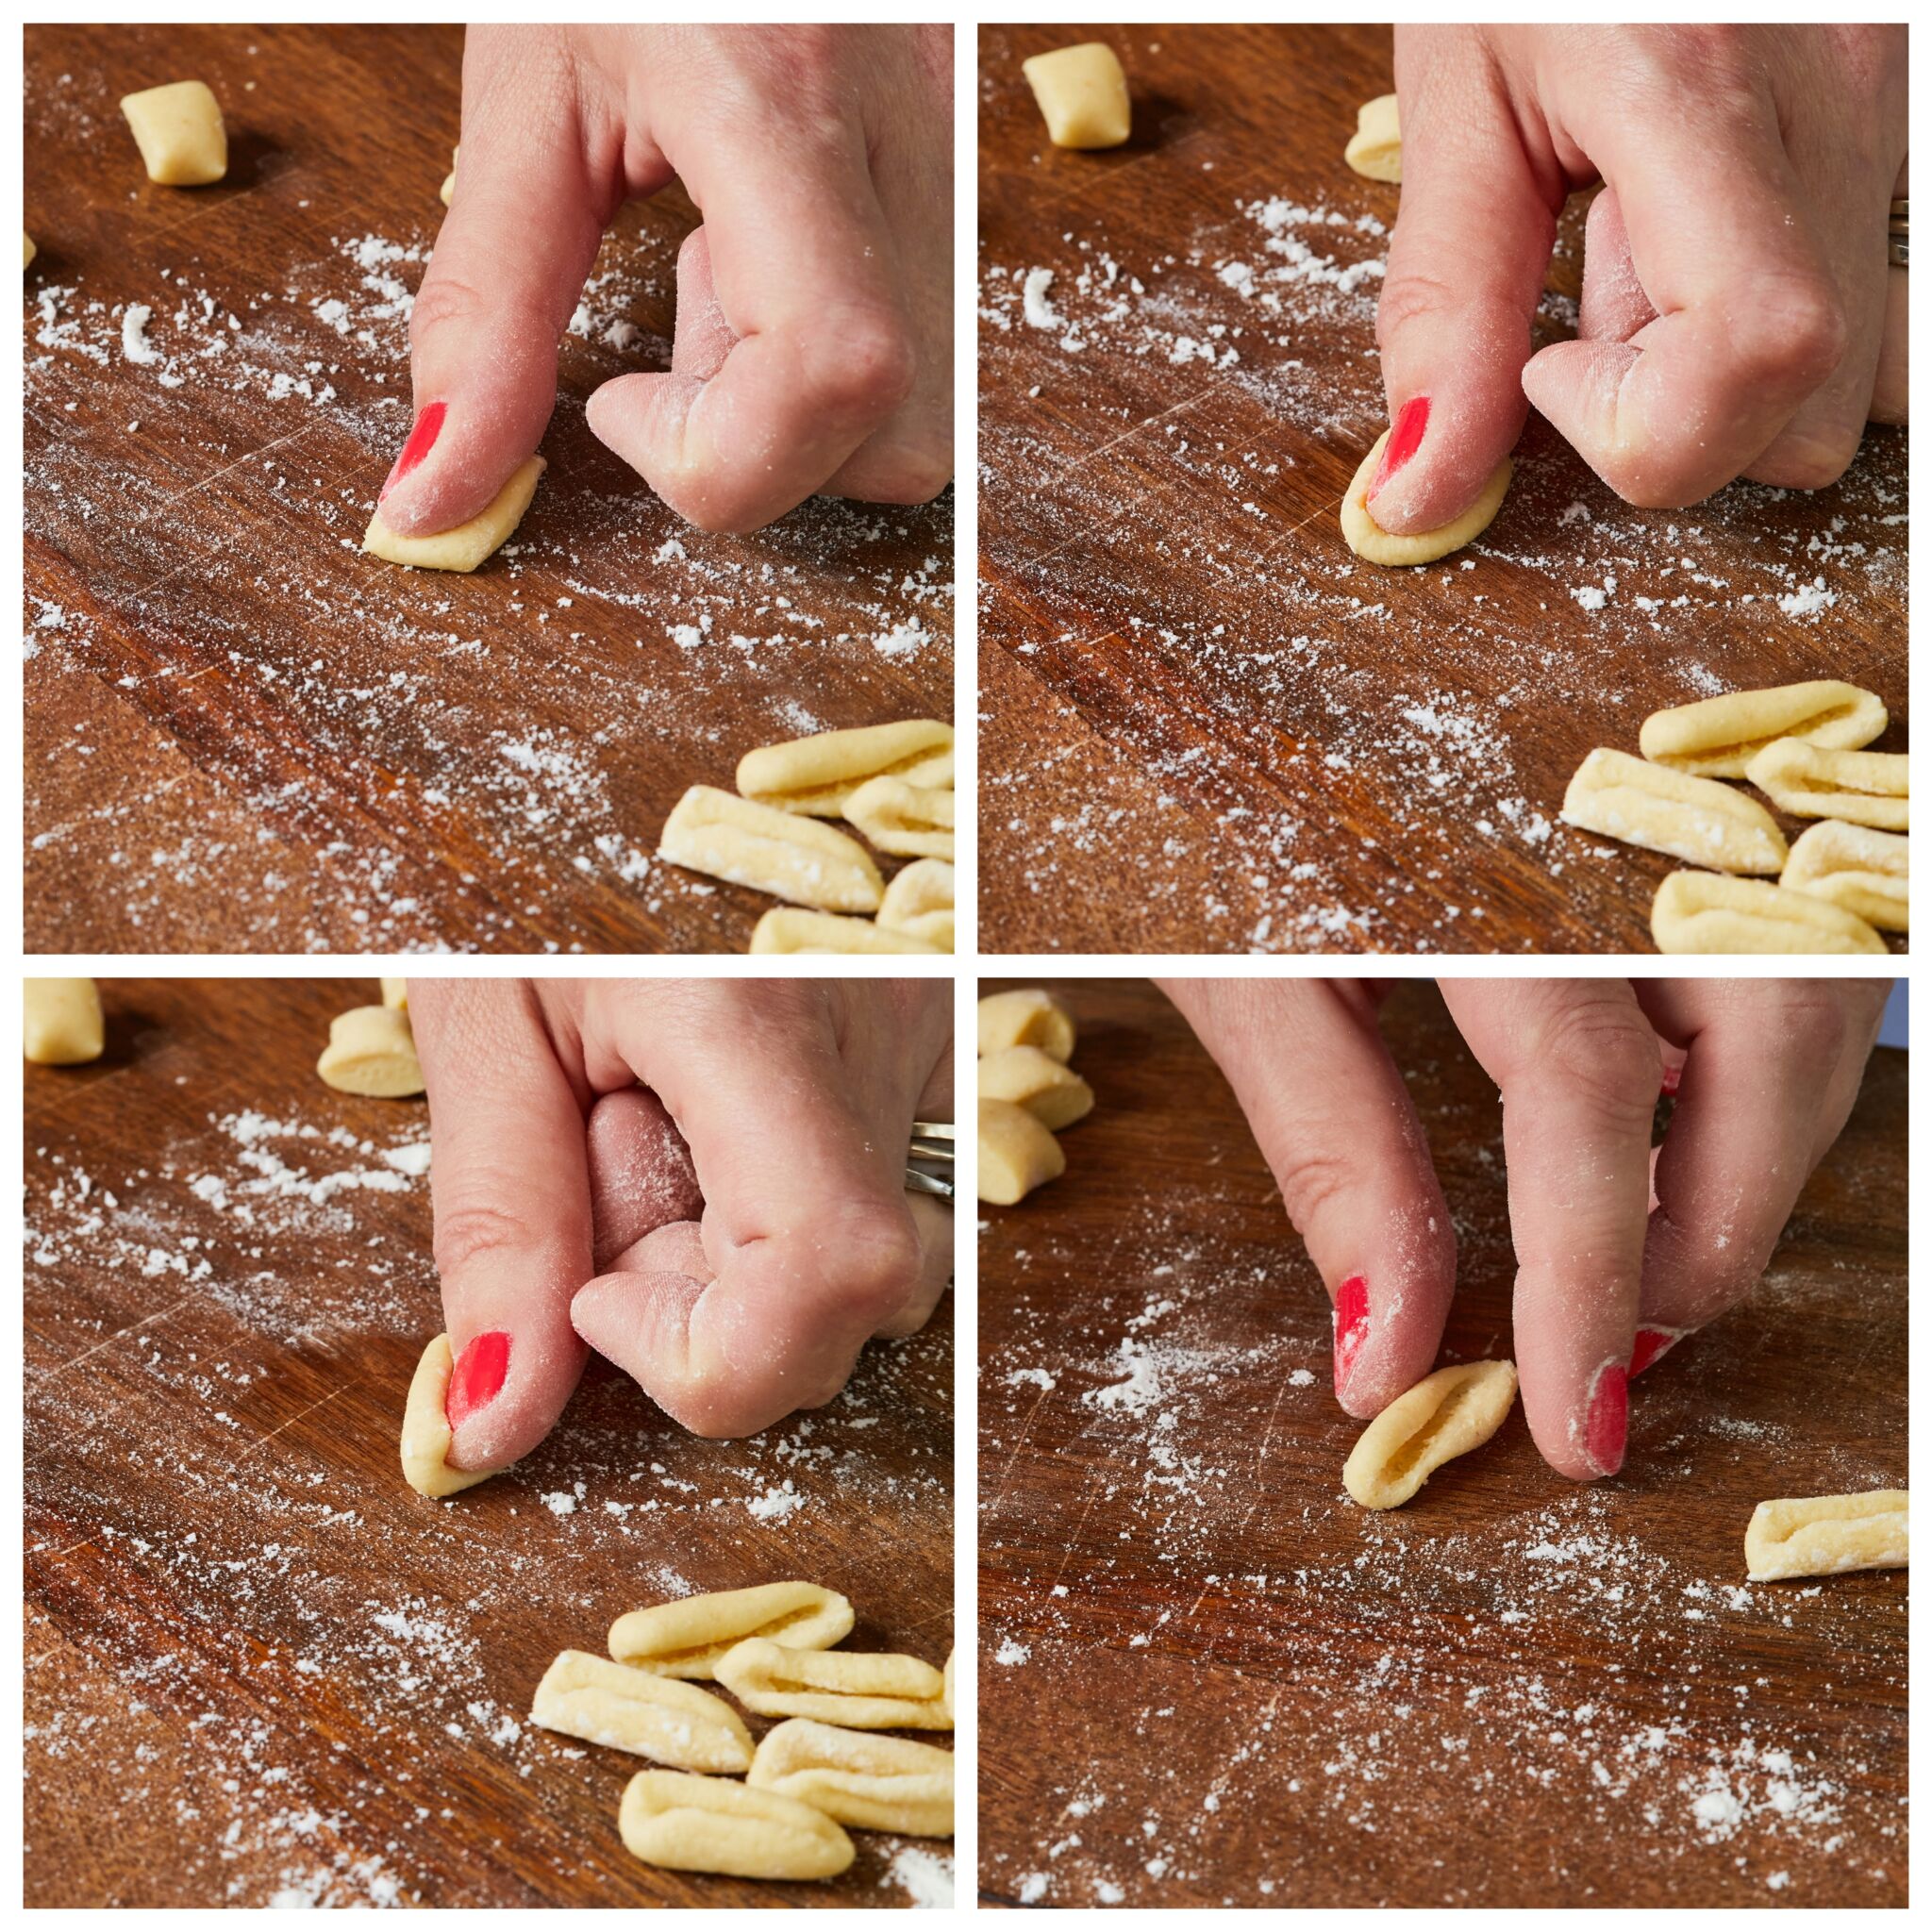 Step-by-step instructions on how to shape Cavatelli pasta: take one piece of dough and place a table knife at a 45° angle along the cut edge of the dough. Push the knife into the dough and away from you at the same time so that the dough curls around the blade and resembles a small hot dog bun. 